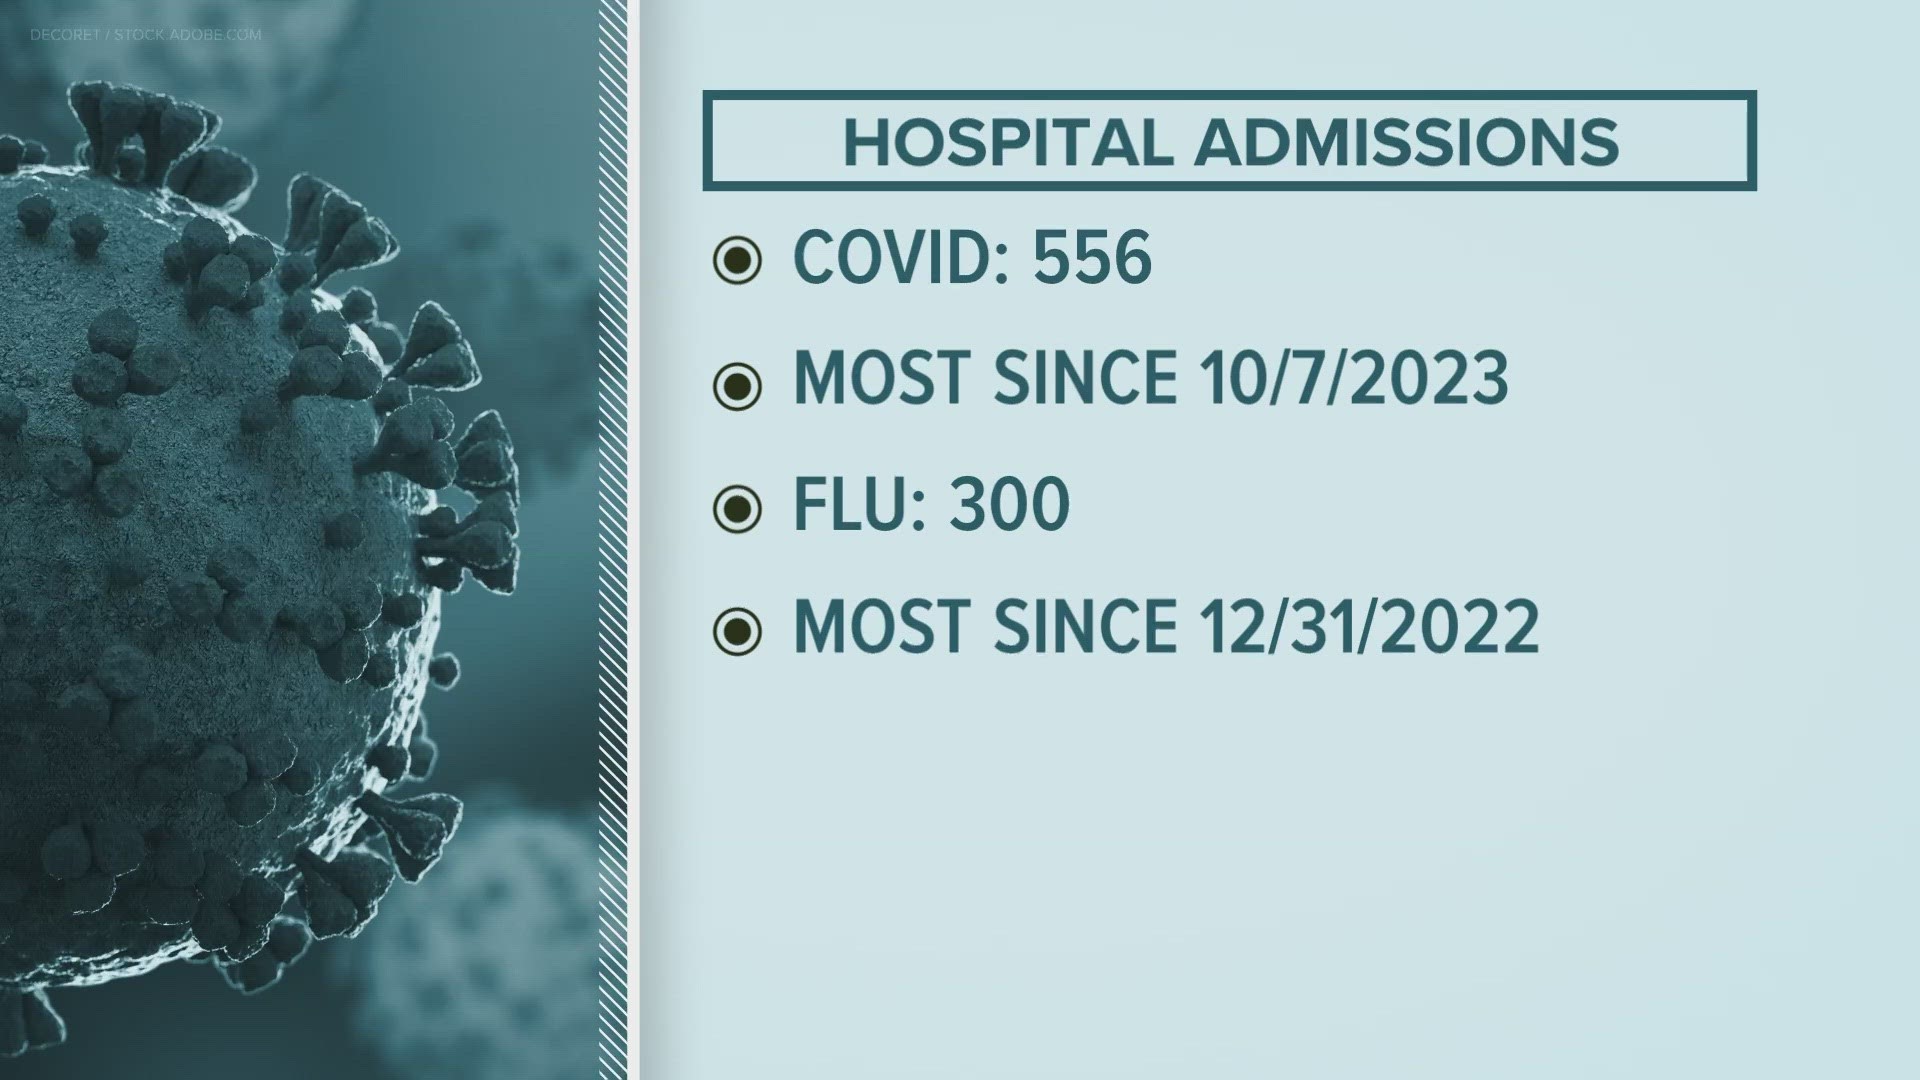 State health department data shows hospitals admitted 556 people for COVID and 300 for flu in the last week, an increase from the week prior.